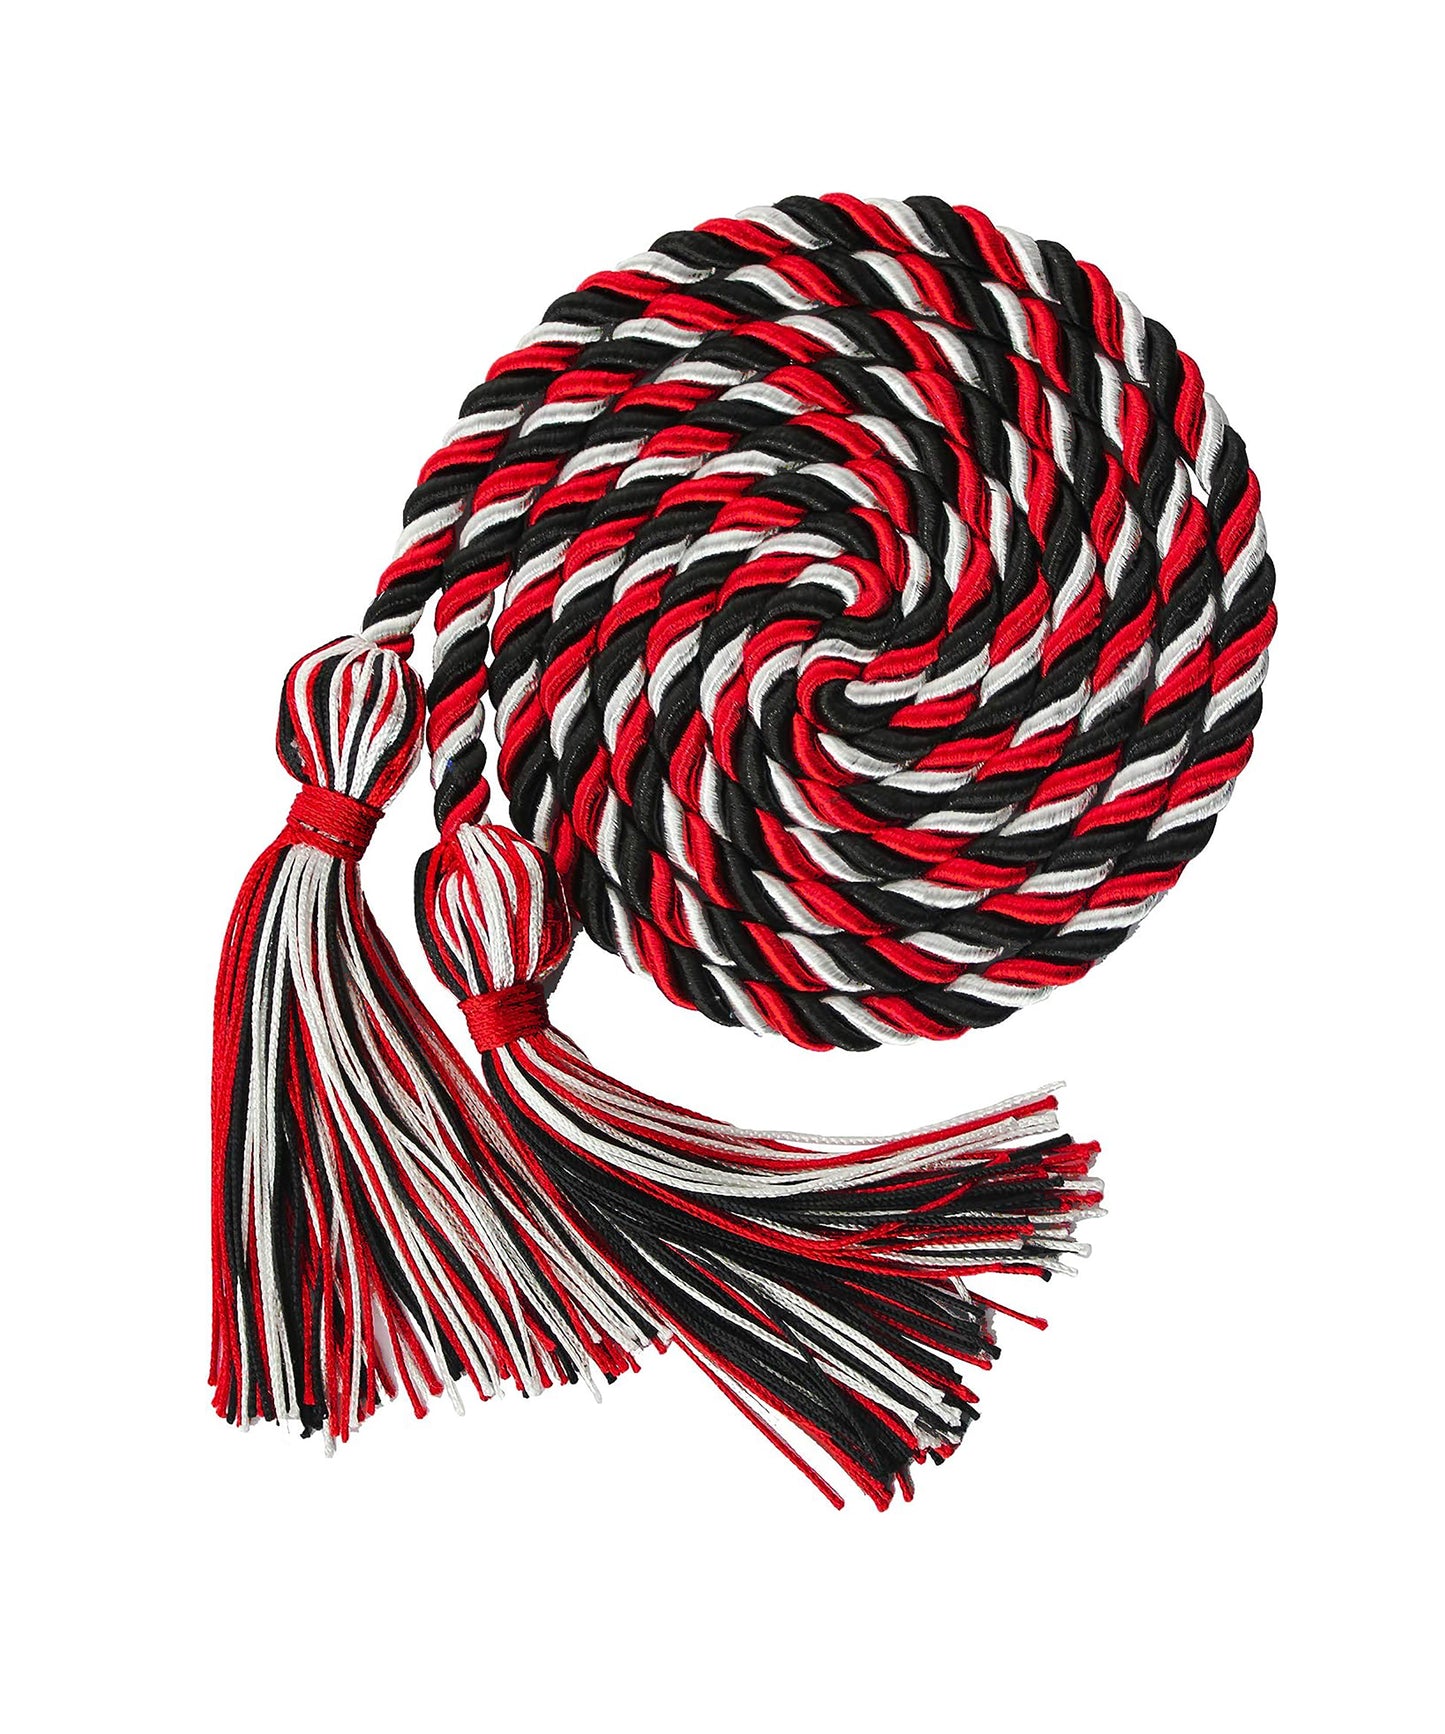 Doctoral Honor Cords